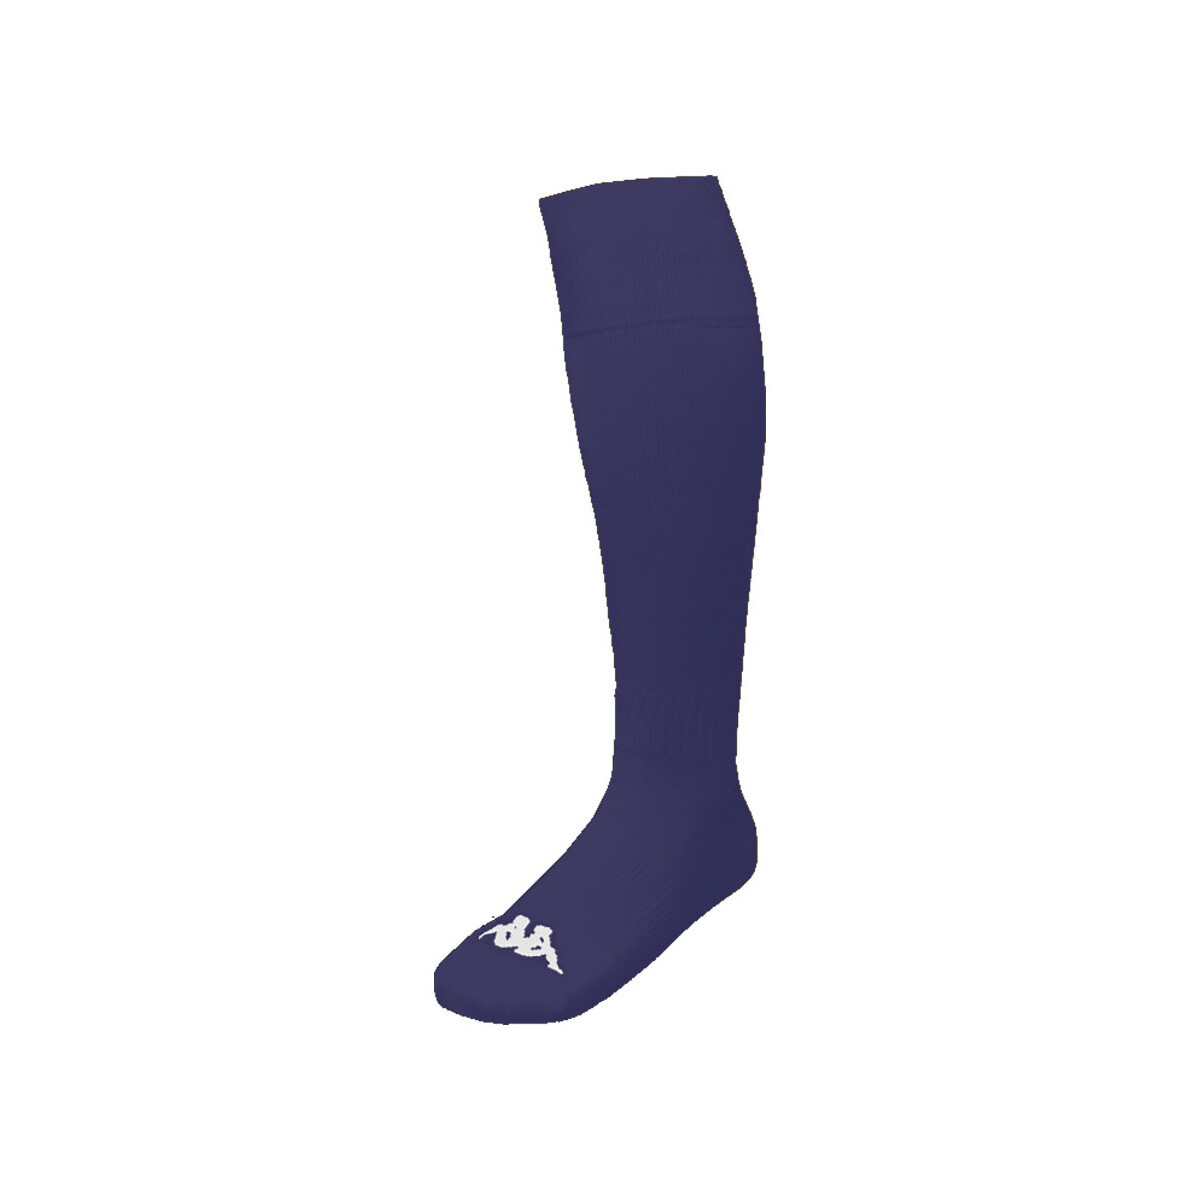 Kappa Bleu Chaussettes Lyna (3 paires) pW1TAZzF